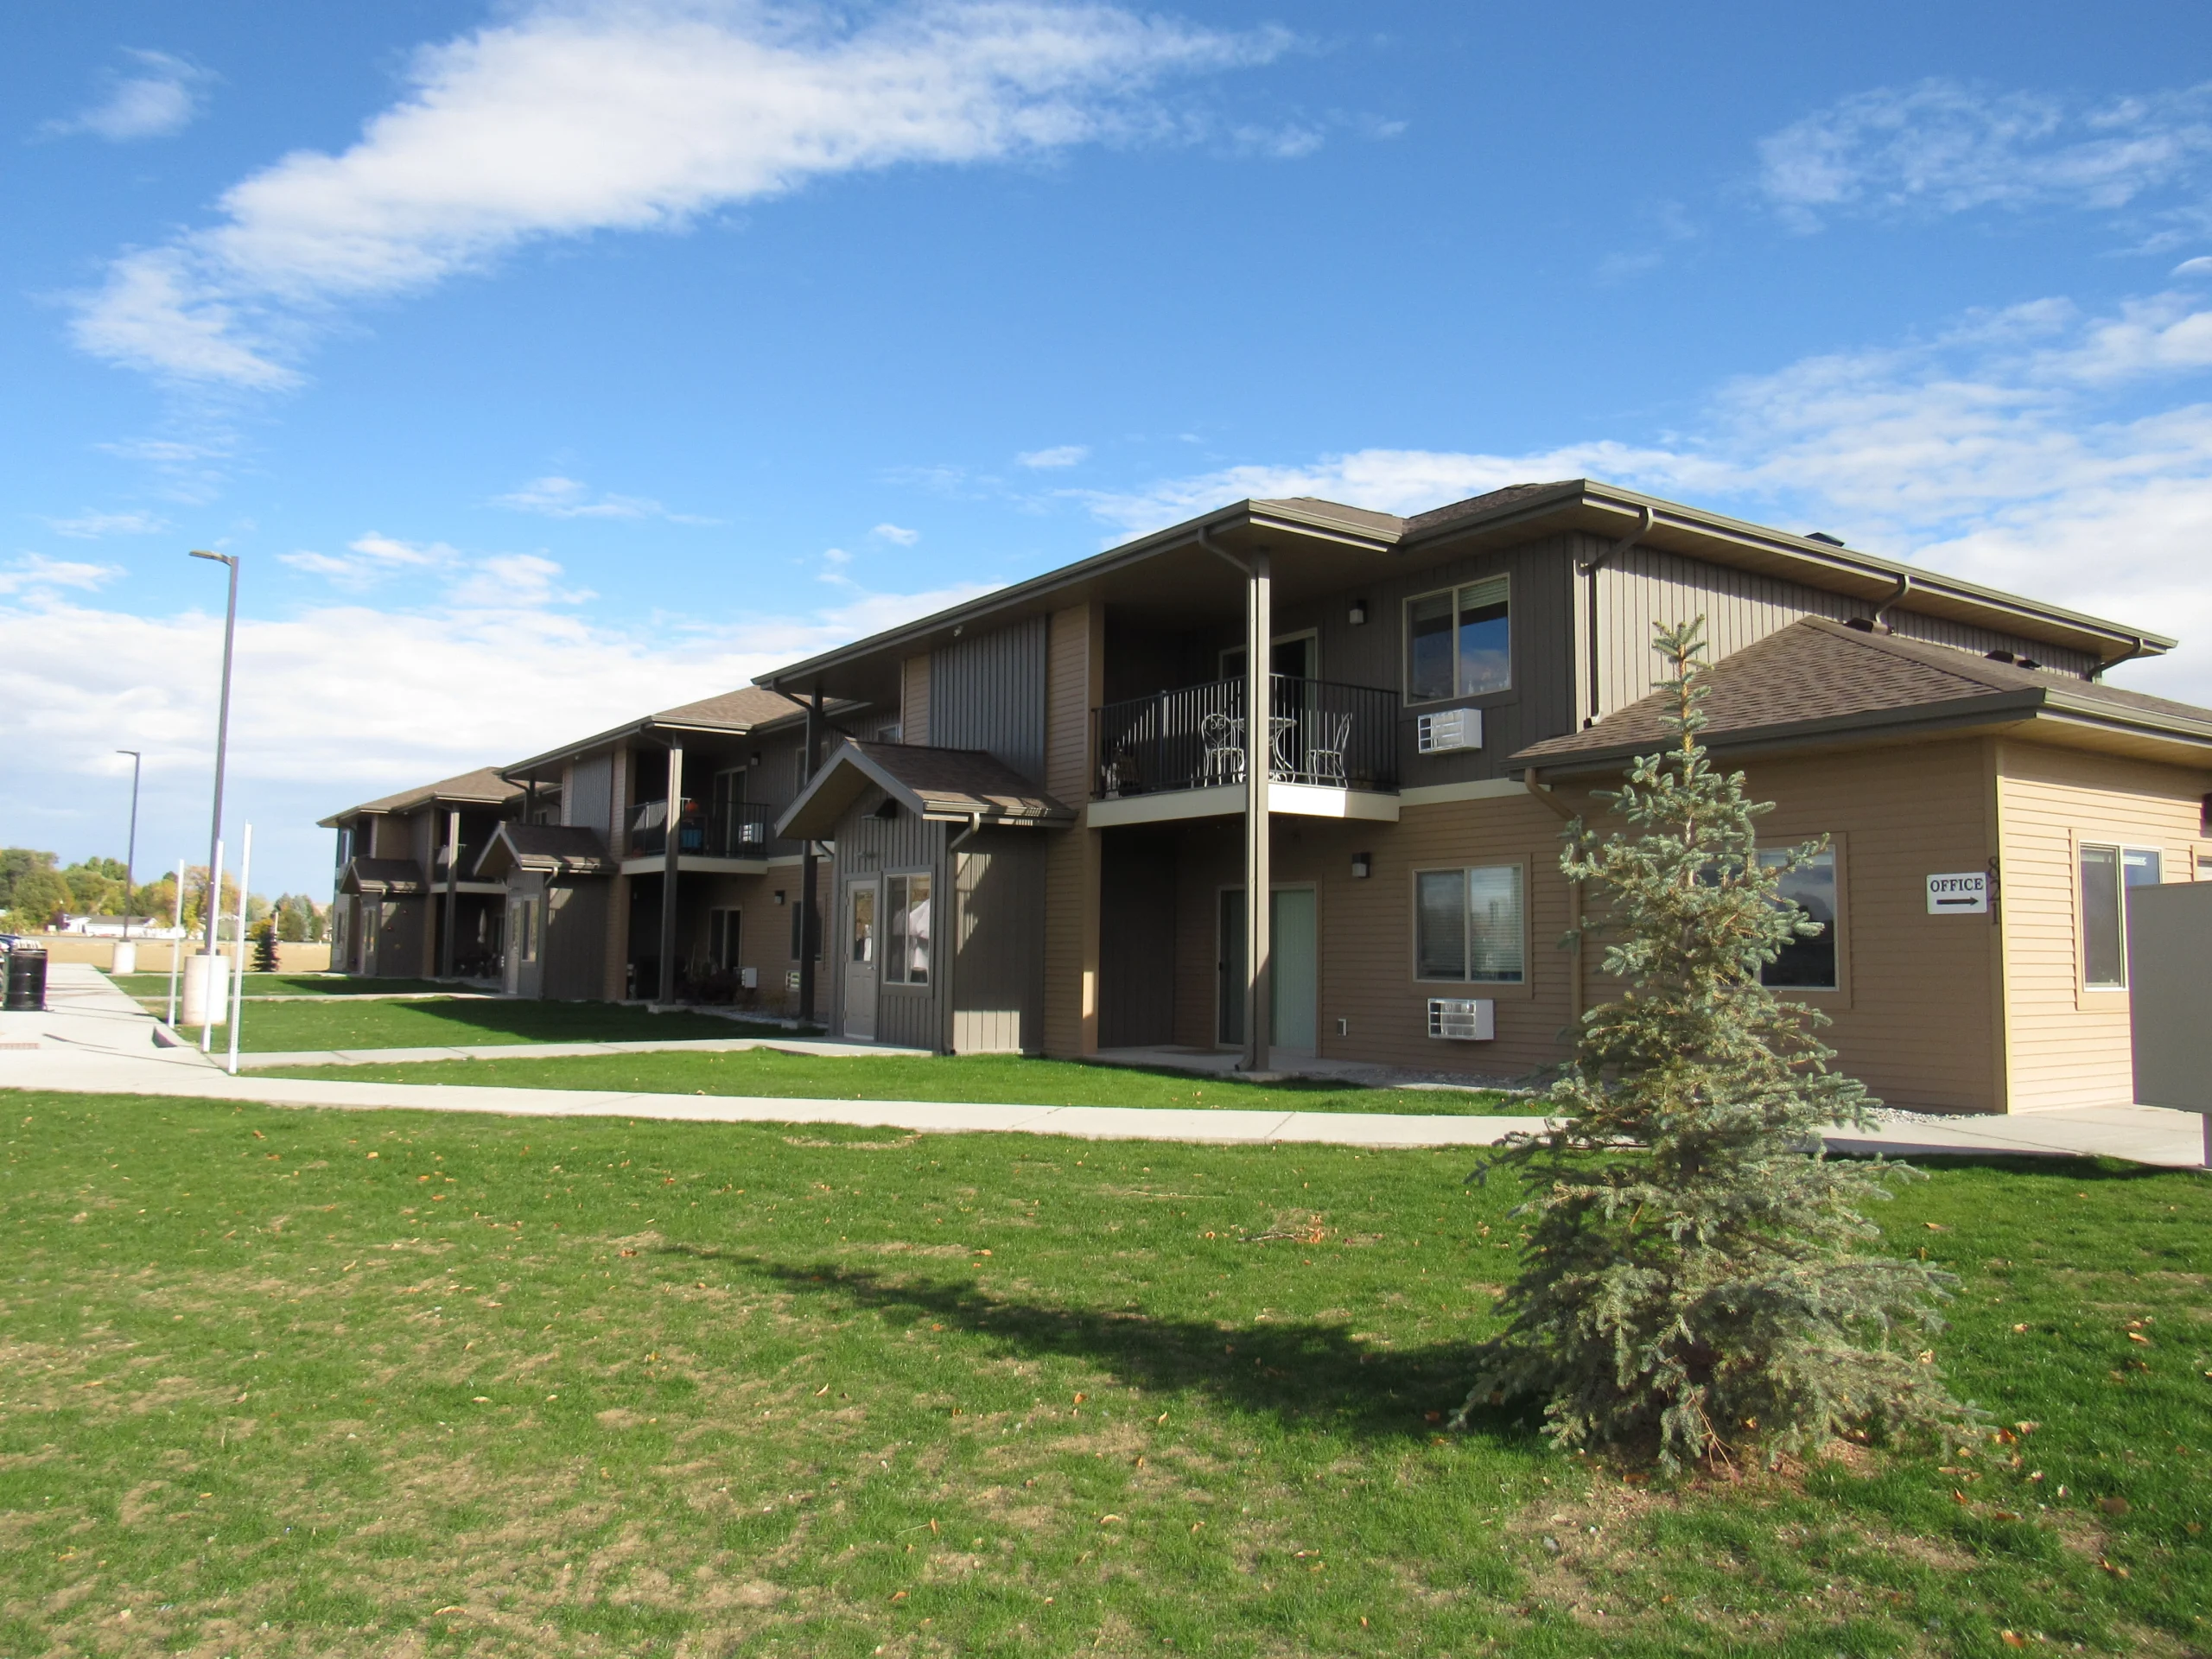 This project is a 12-unit multifamily affordable complex located at 821 No. Absaroka Street in Powell, WY.  CR Builders teamed with Wyoming Housing Network, Inc. to bring this much-needed affordable housing project to the Powell market. 